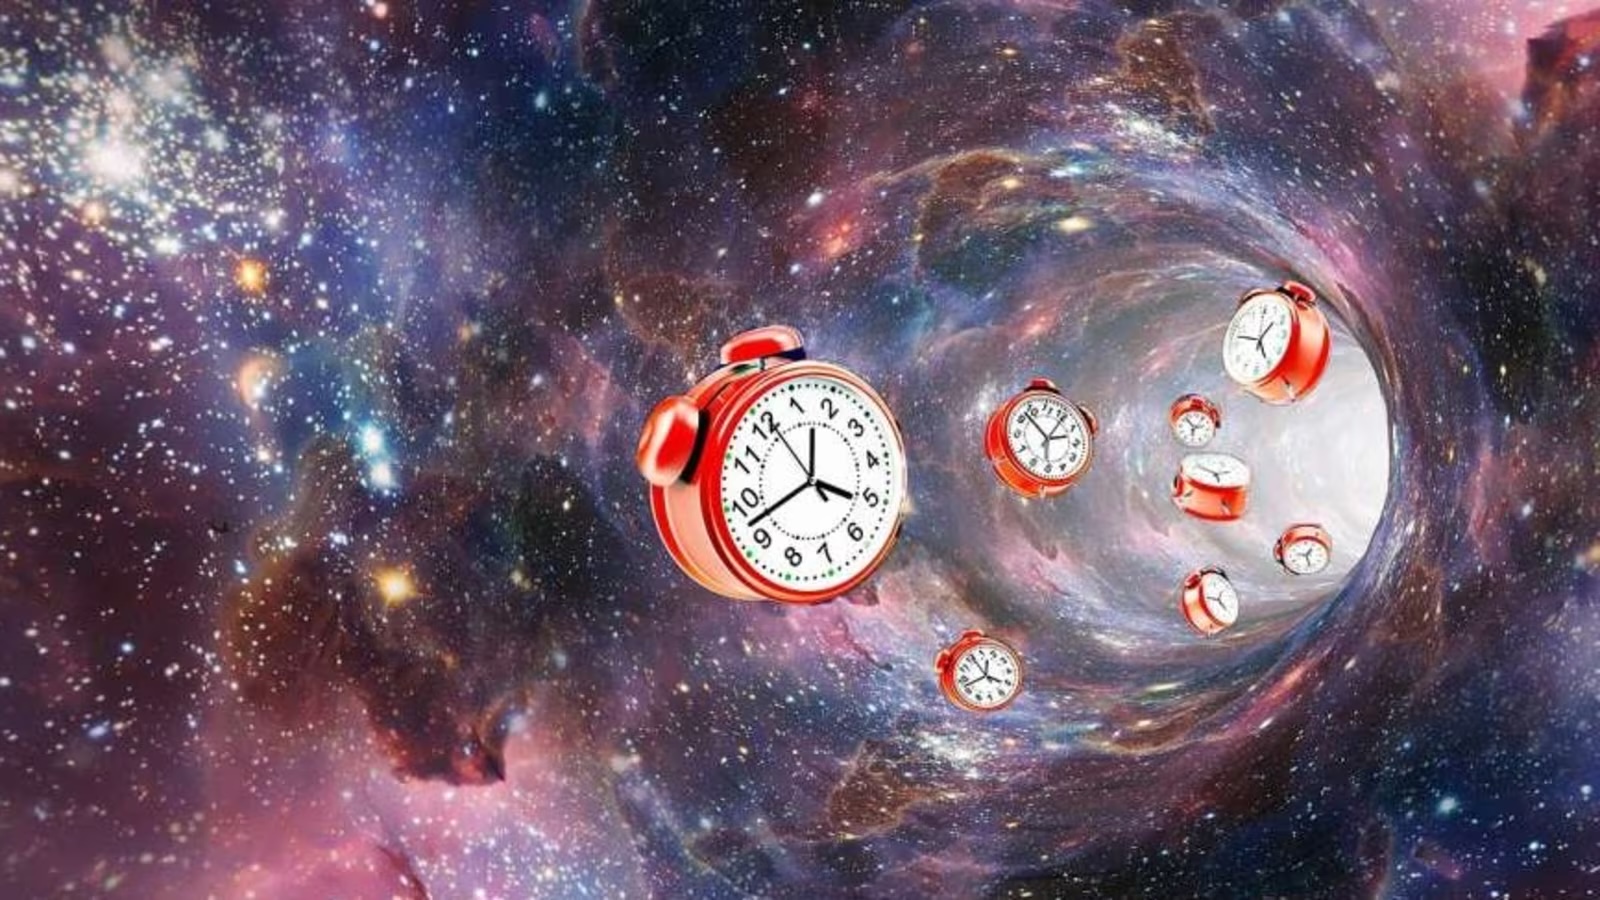 Which Of The Seven Deadly Sins Are You? Time travel